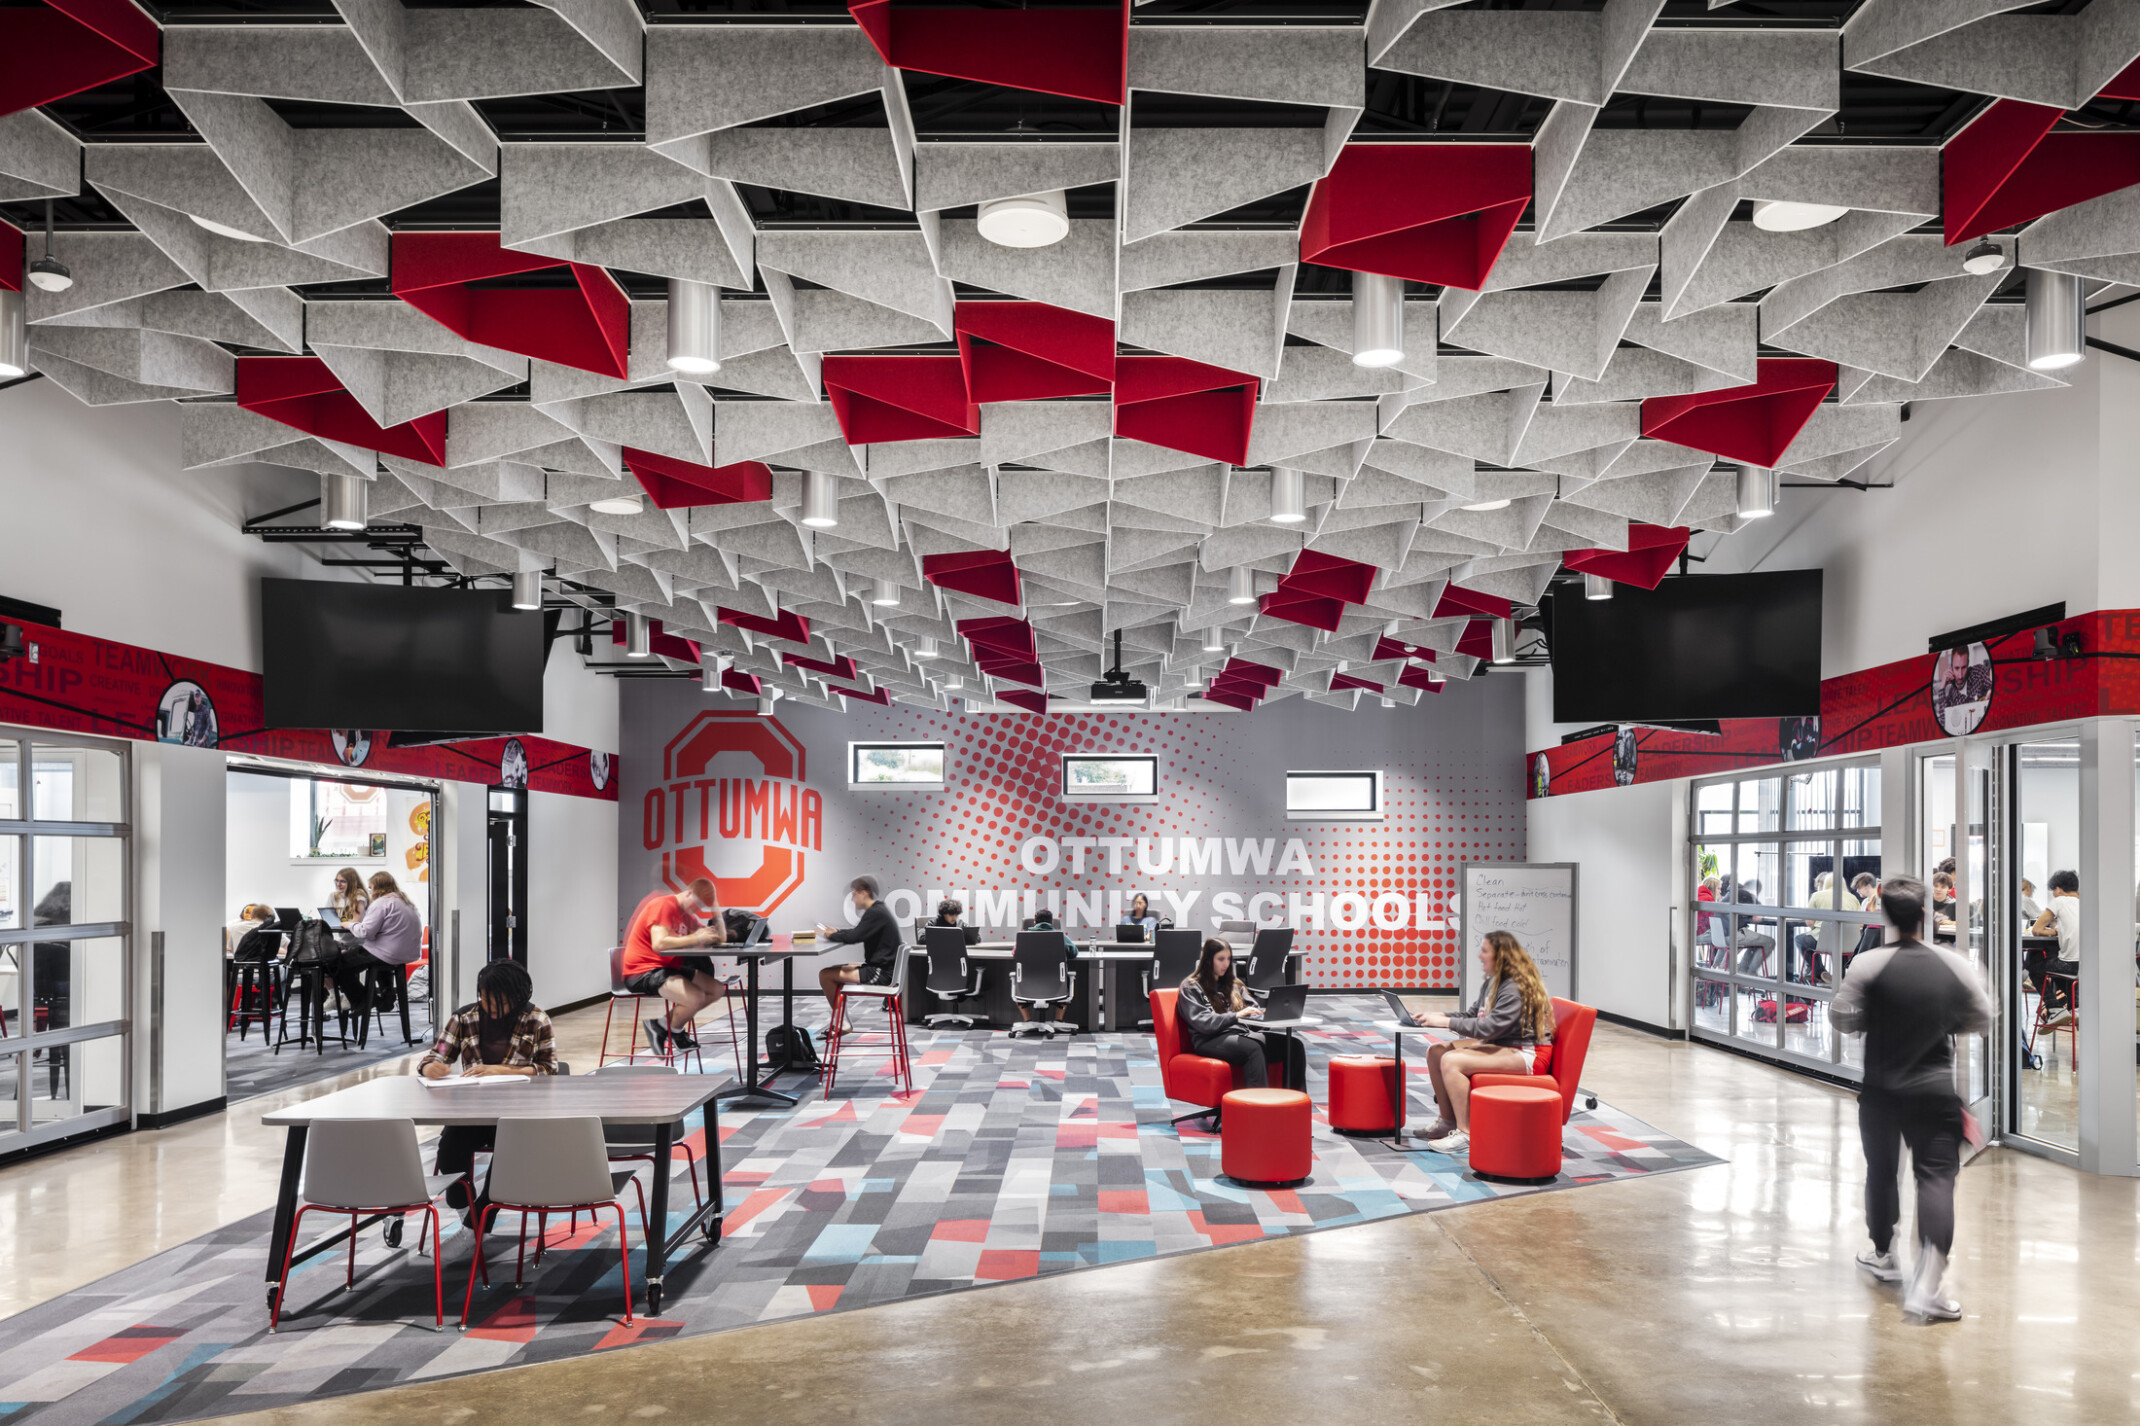 Ottumwa Career Campus interior seating area with grey and red baffles above mixed seating space